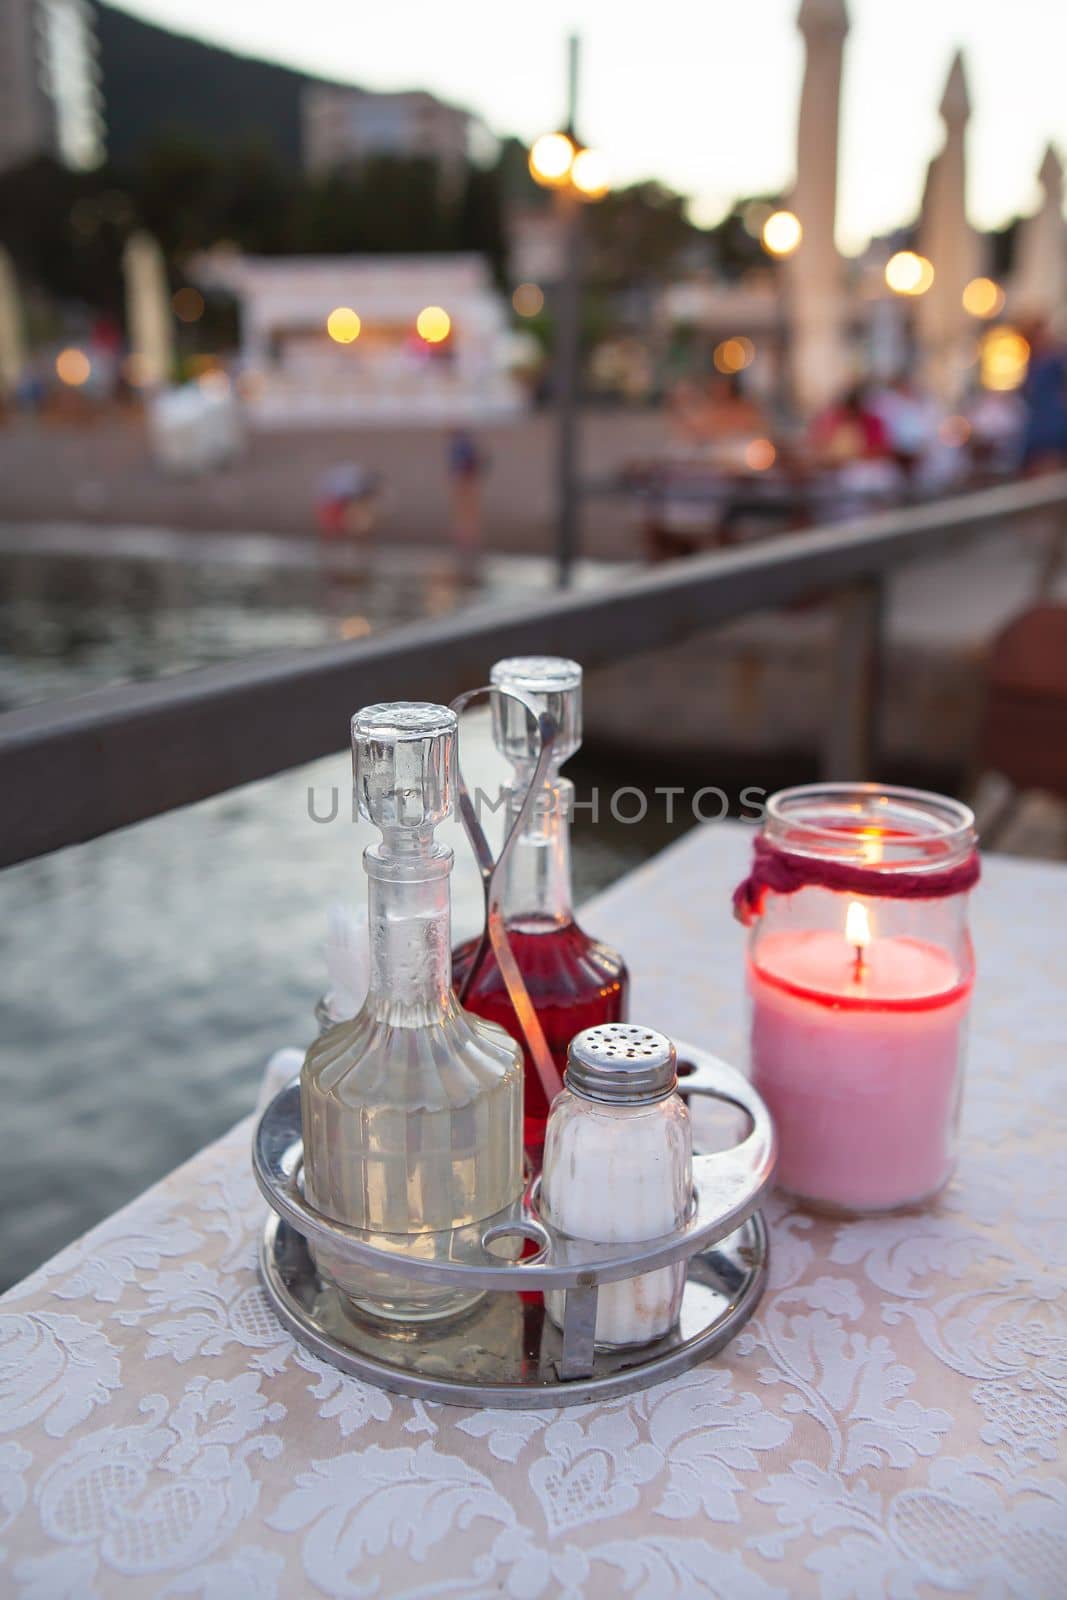 The terrace of the restaurant by the sea, there is a candle on the table. Against the backdrop of a beautiful resort town. Romantic dinner by the sea. by sfinks